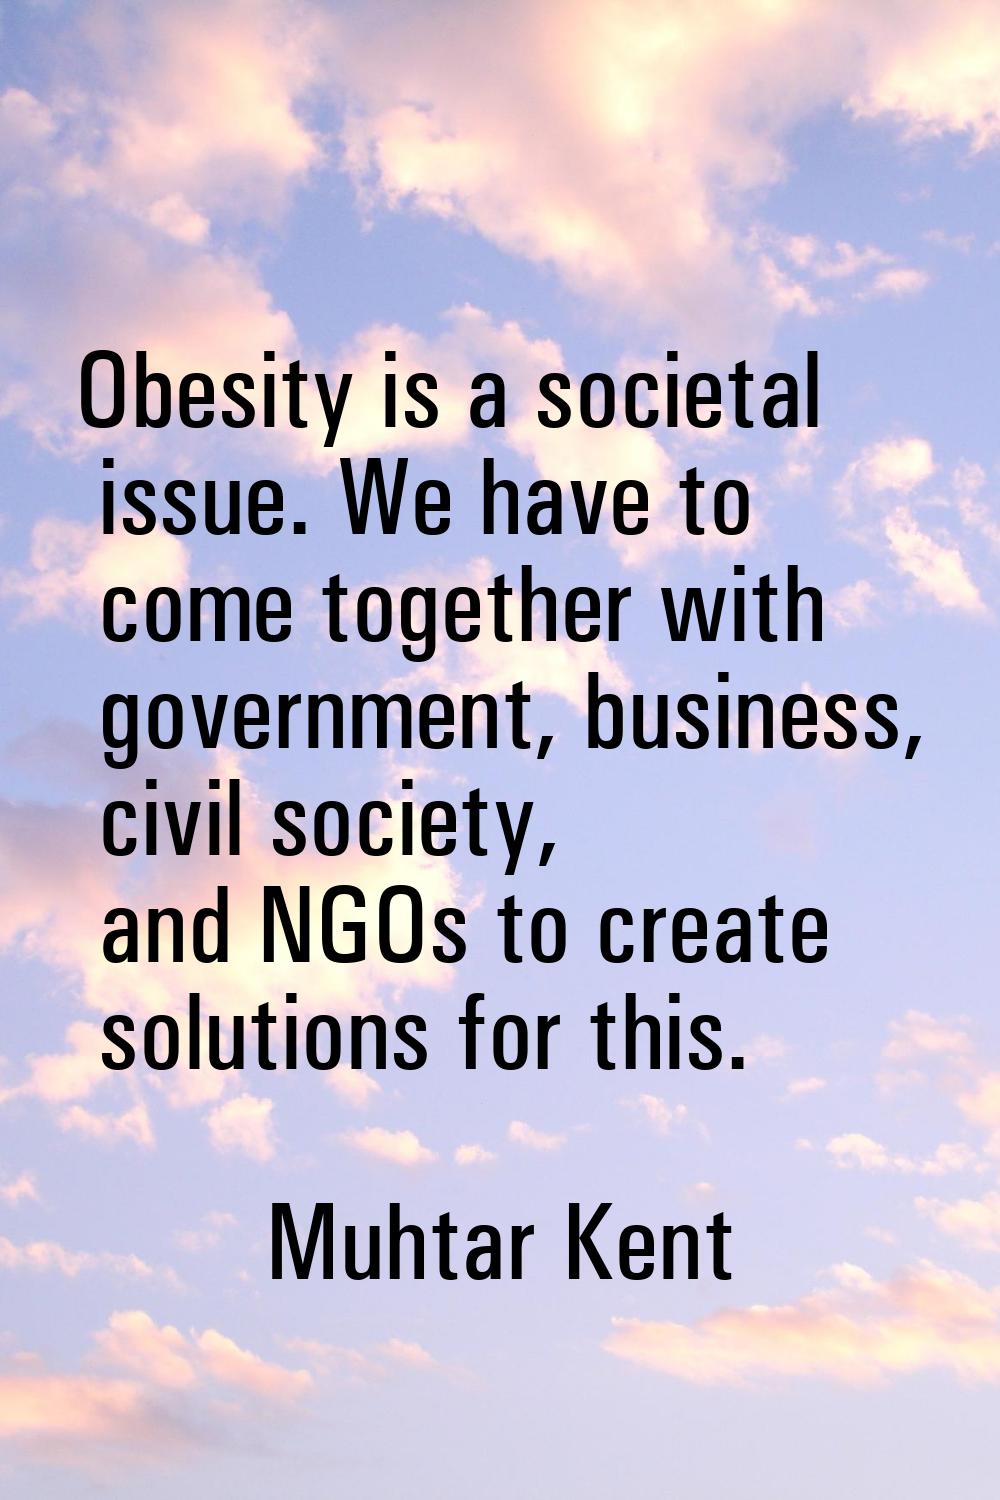 Obesity is a societal issue. We have to come together with government, business, civil society, and